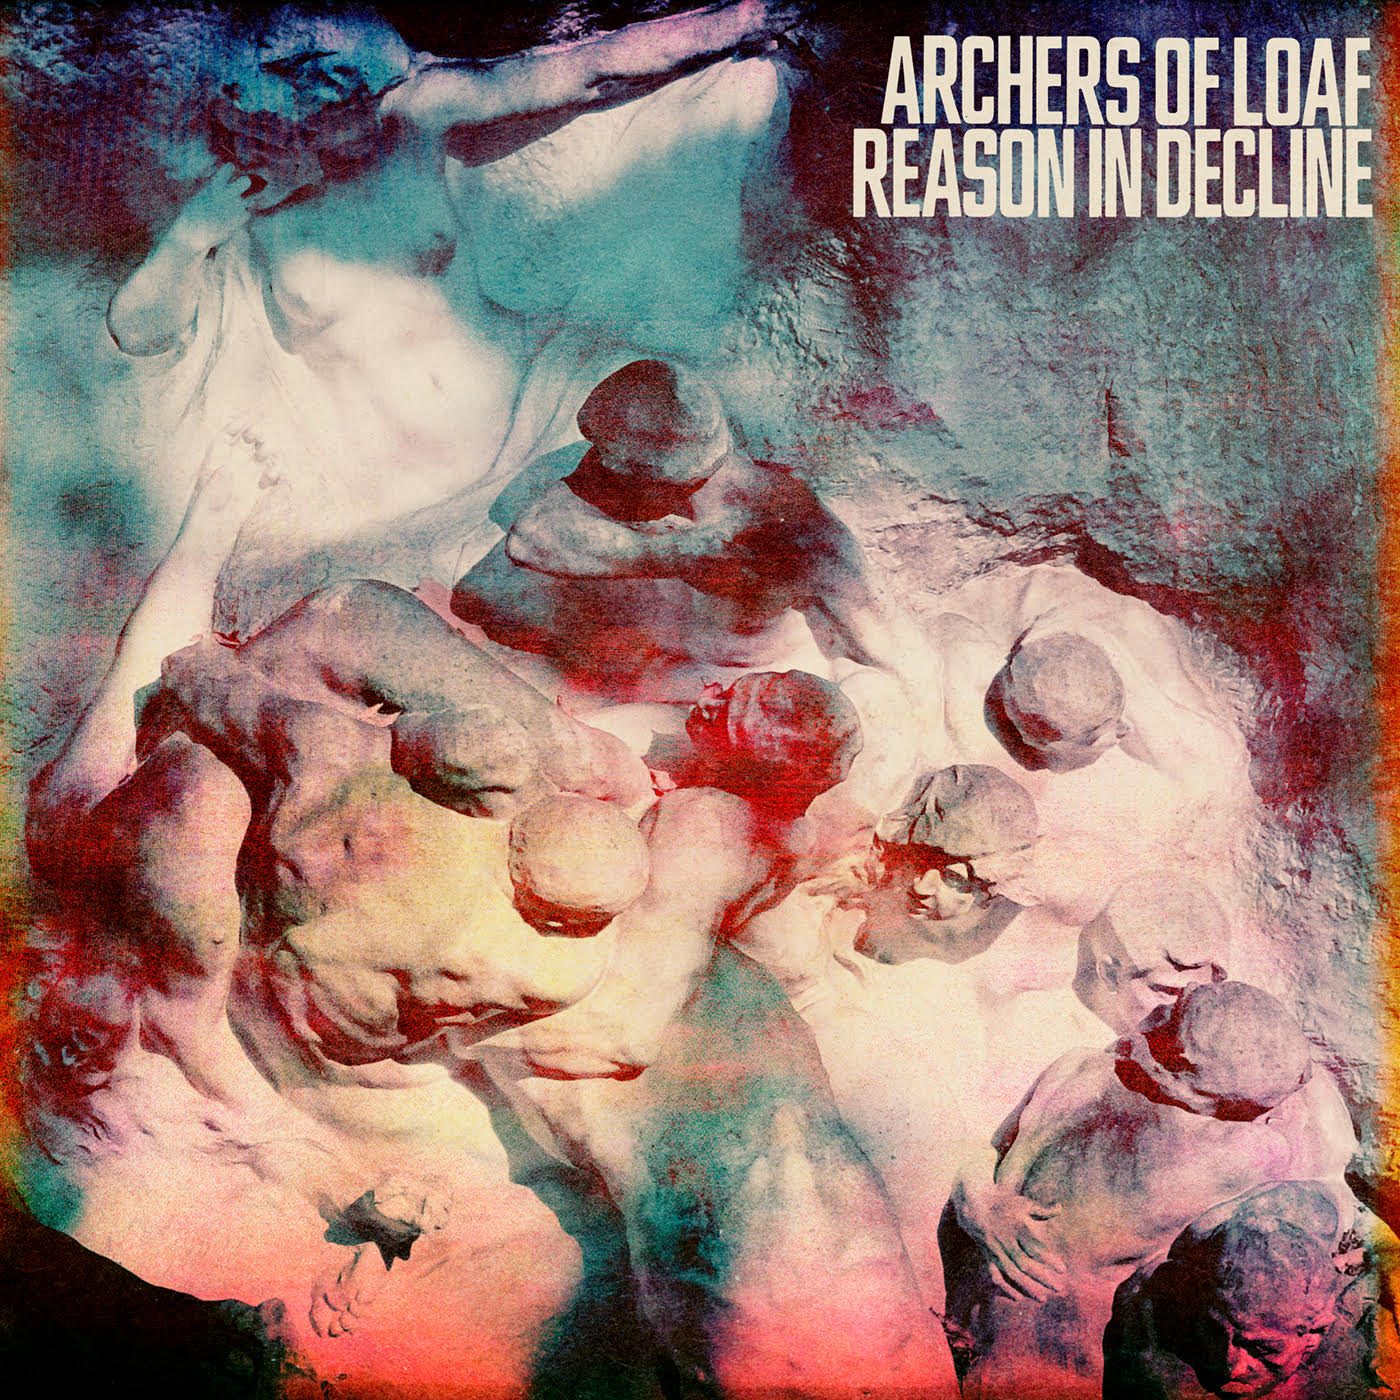 Archers of Loaf - Reason in Decline LP / CD